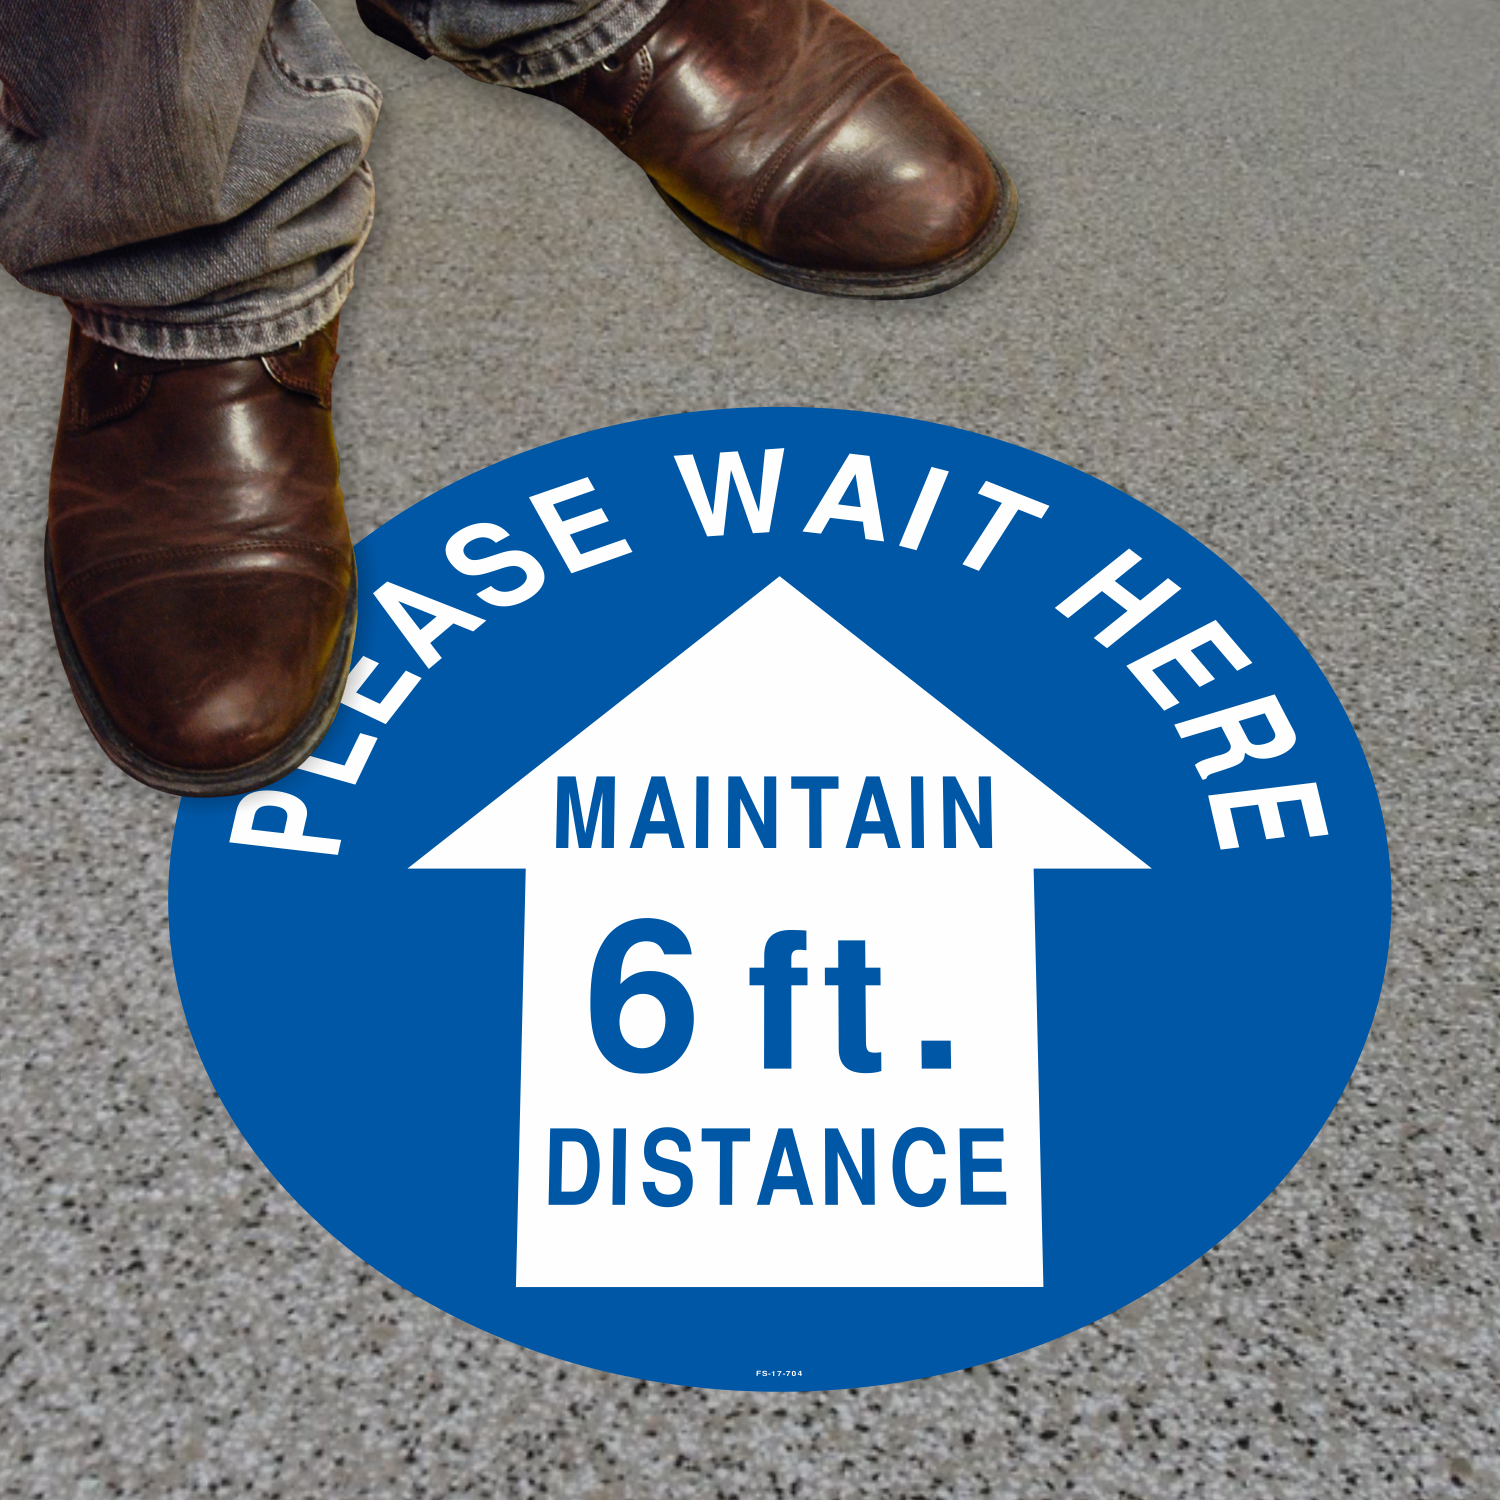 Social Distancing Indoor Multi-Surface Floor Sticker 17x 17 Circle Please Wait Here